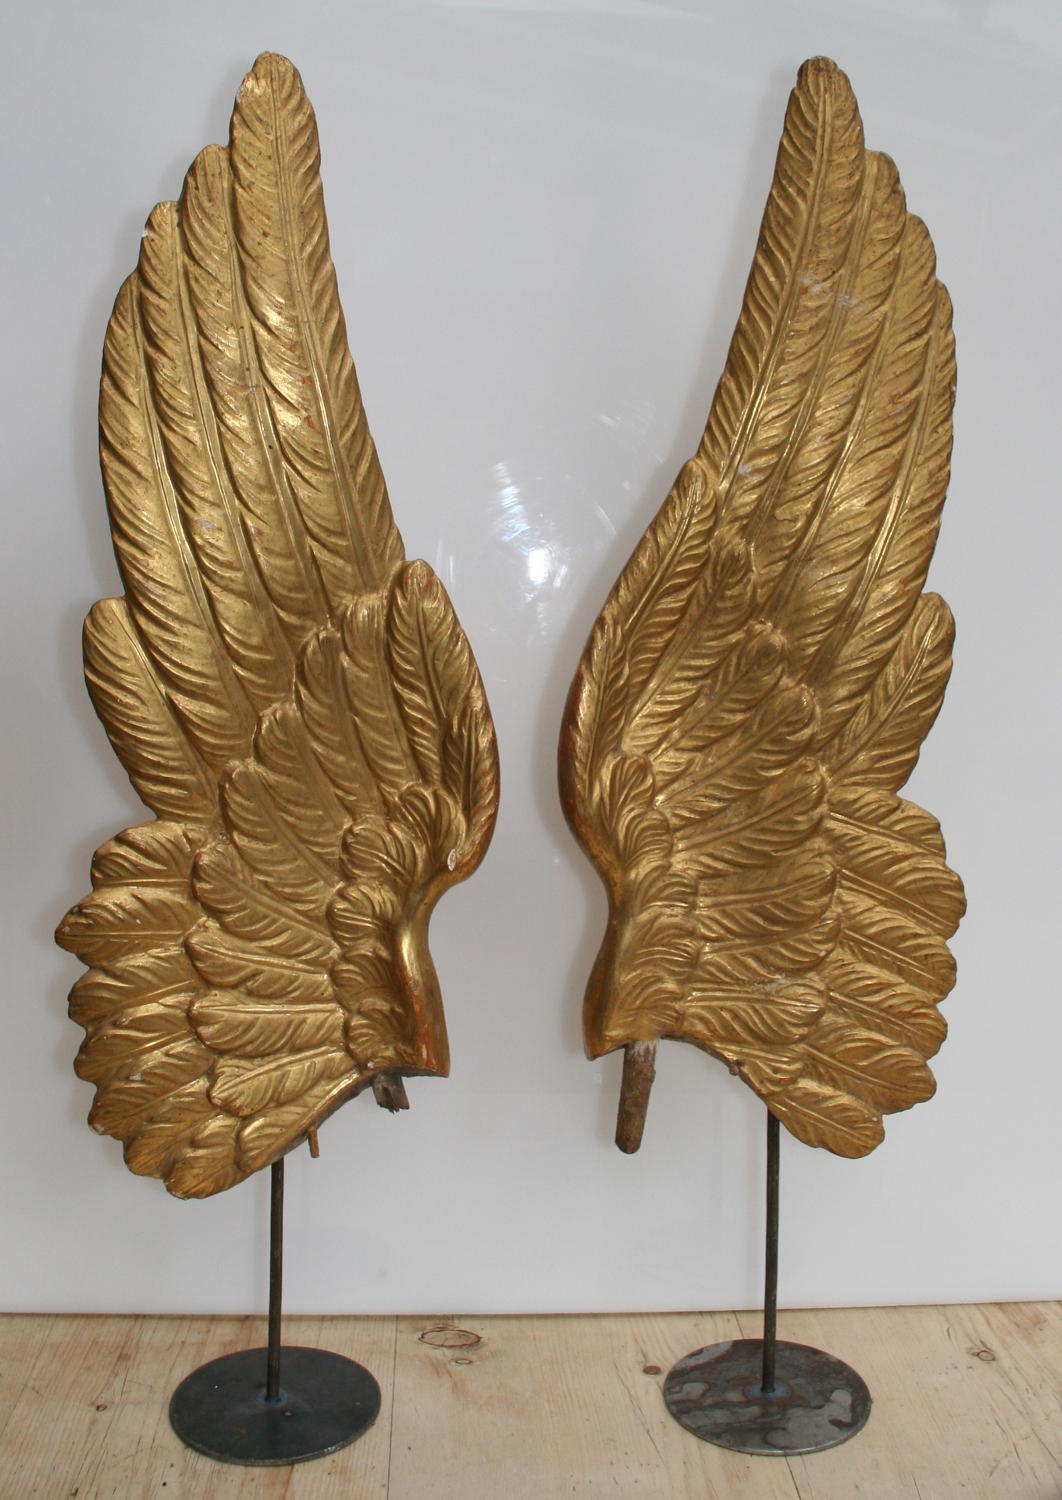 A Fine carved wooden and gilded pair of Angels wings 18th century